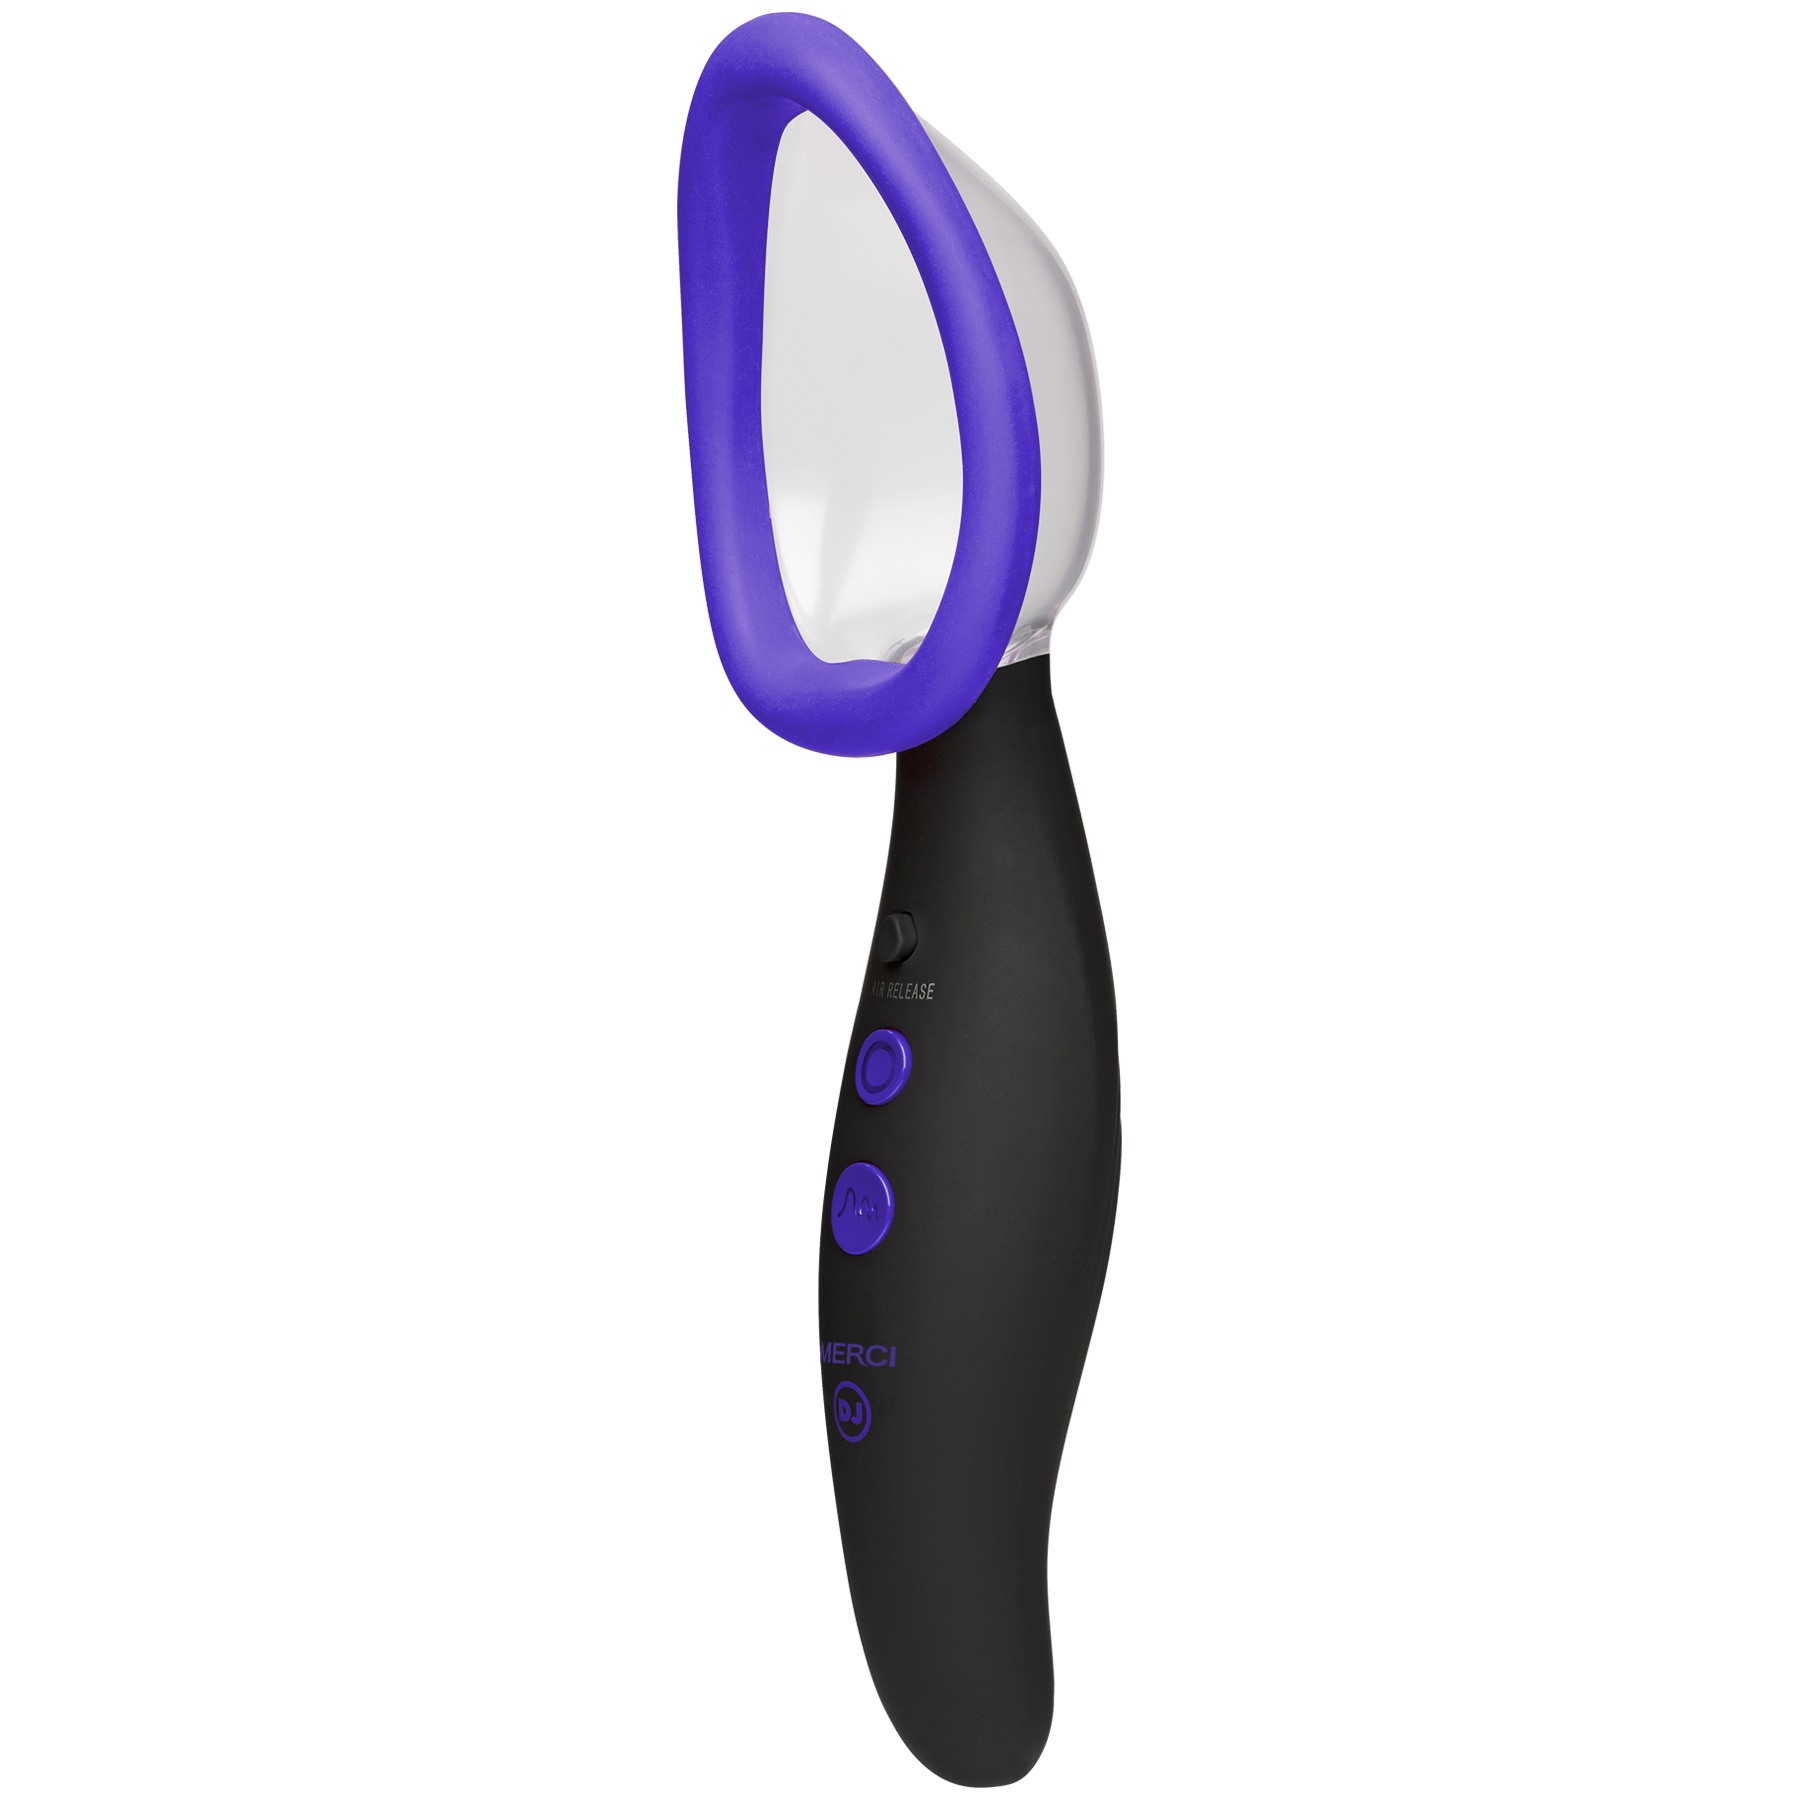 Merci Pumped Rechargeable Automatic Vibrating Pussy Pump